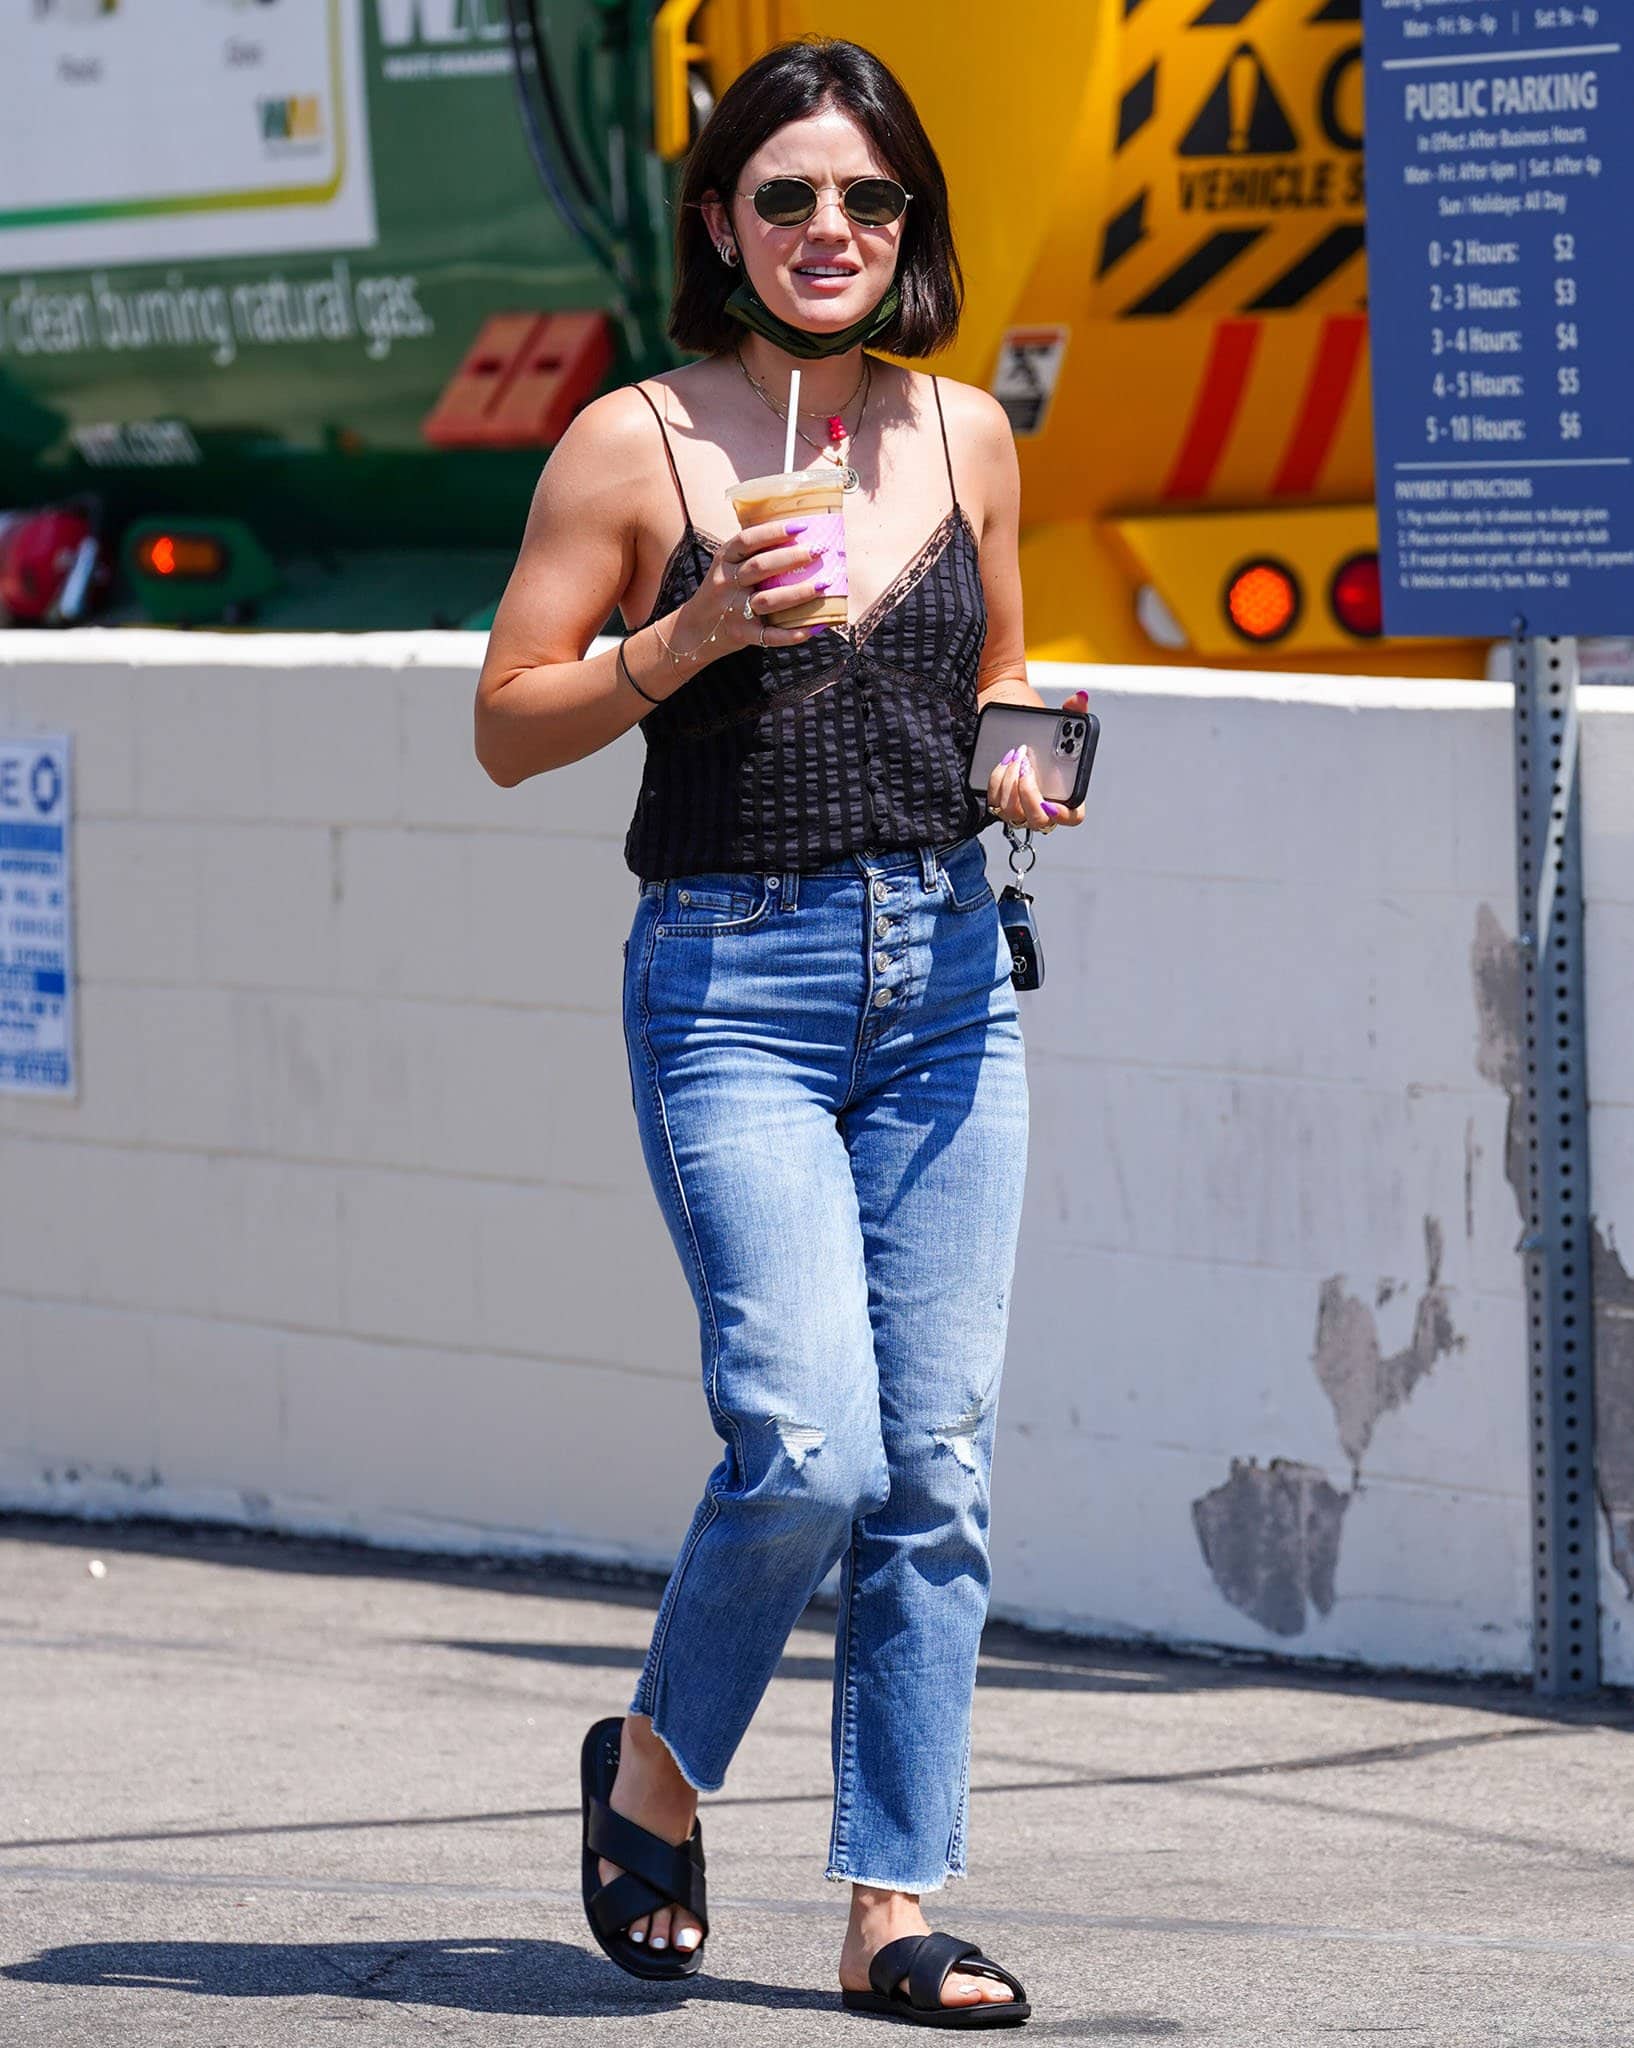 Lucy Hale kicks off her week with a coffee run in Los Angeles on August 30, 2021